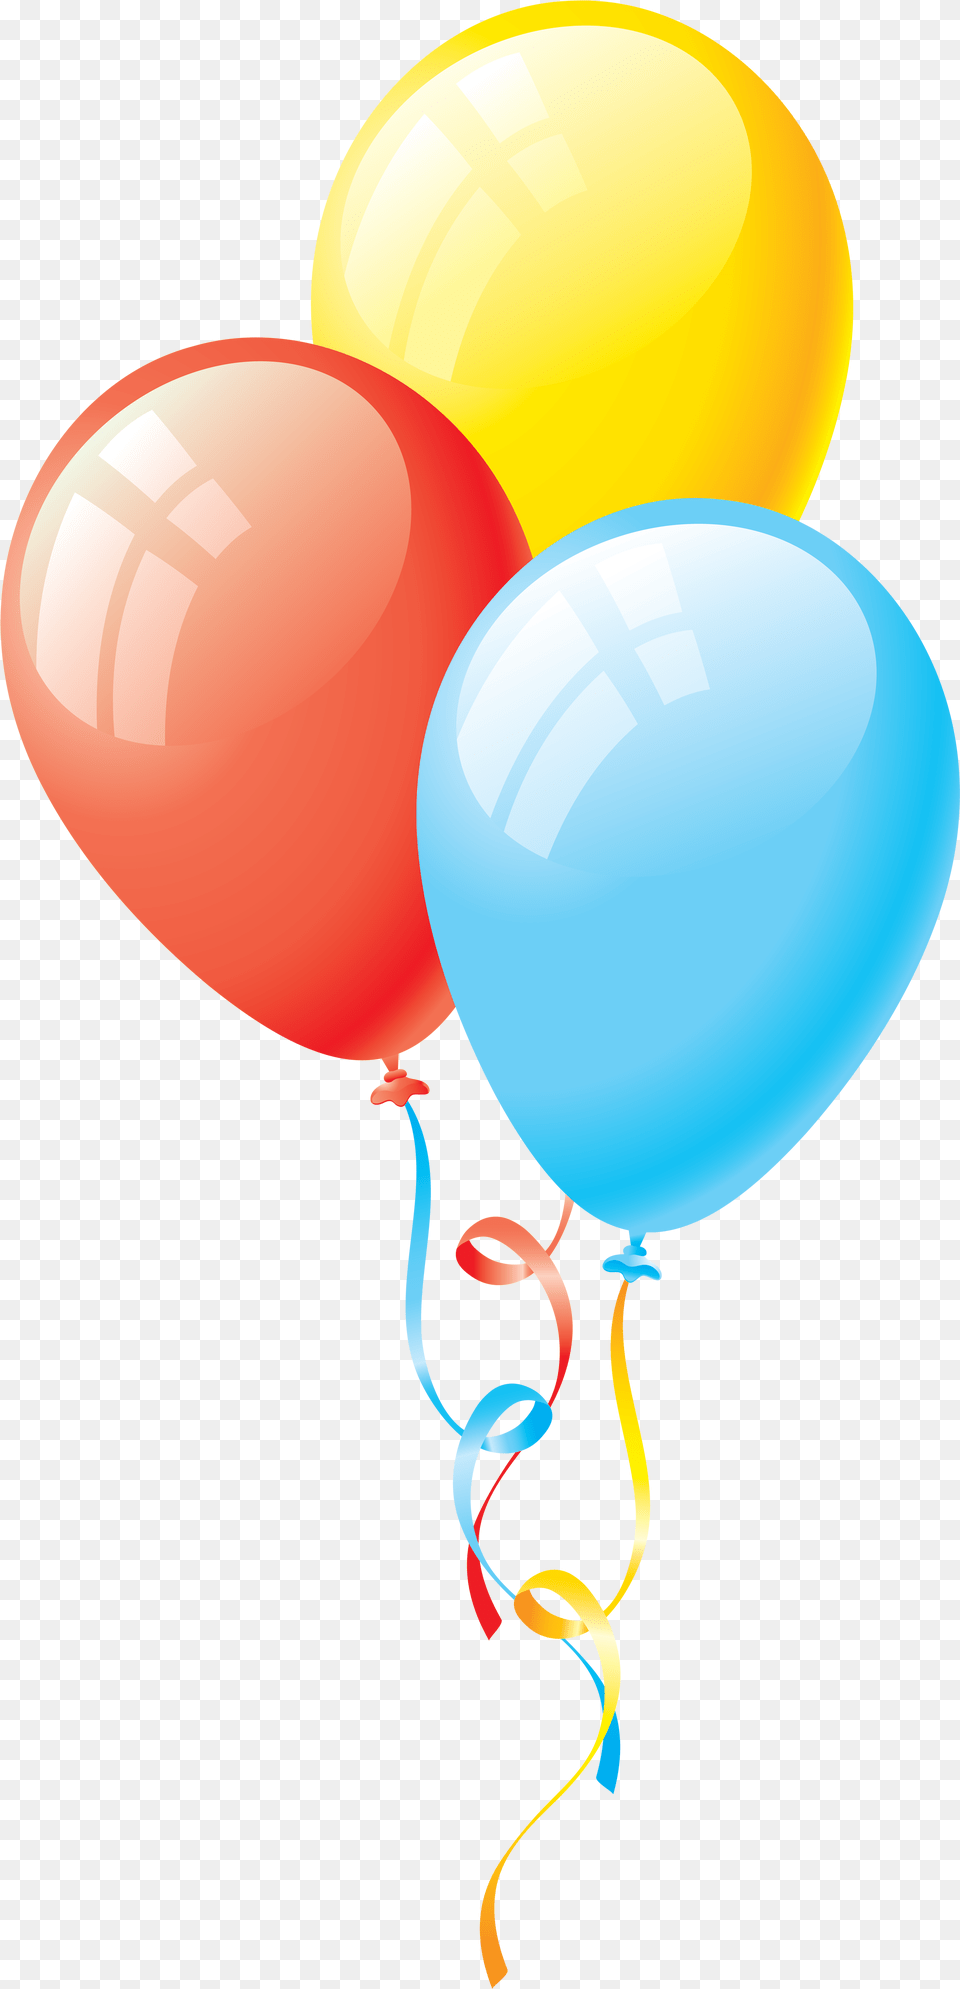 Colorful Balloon Image Birthday Balloons Clip Art Free Png Download